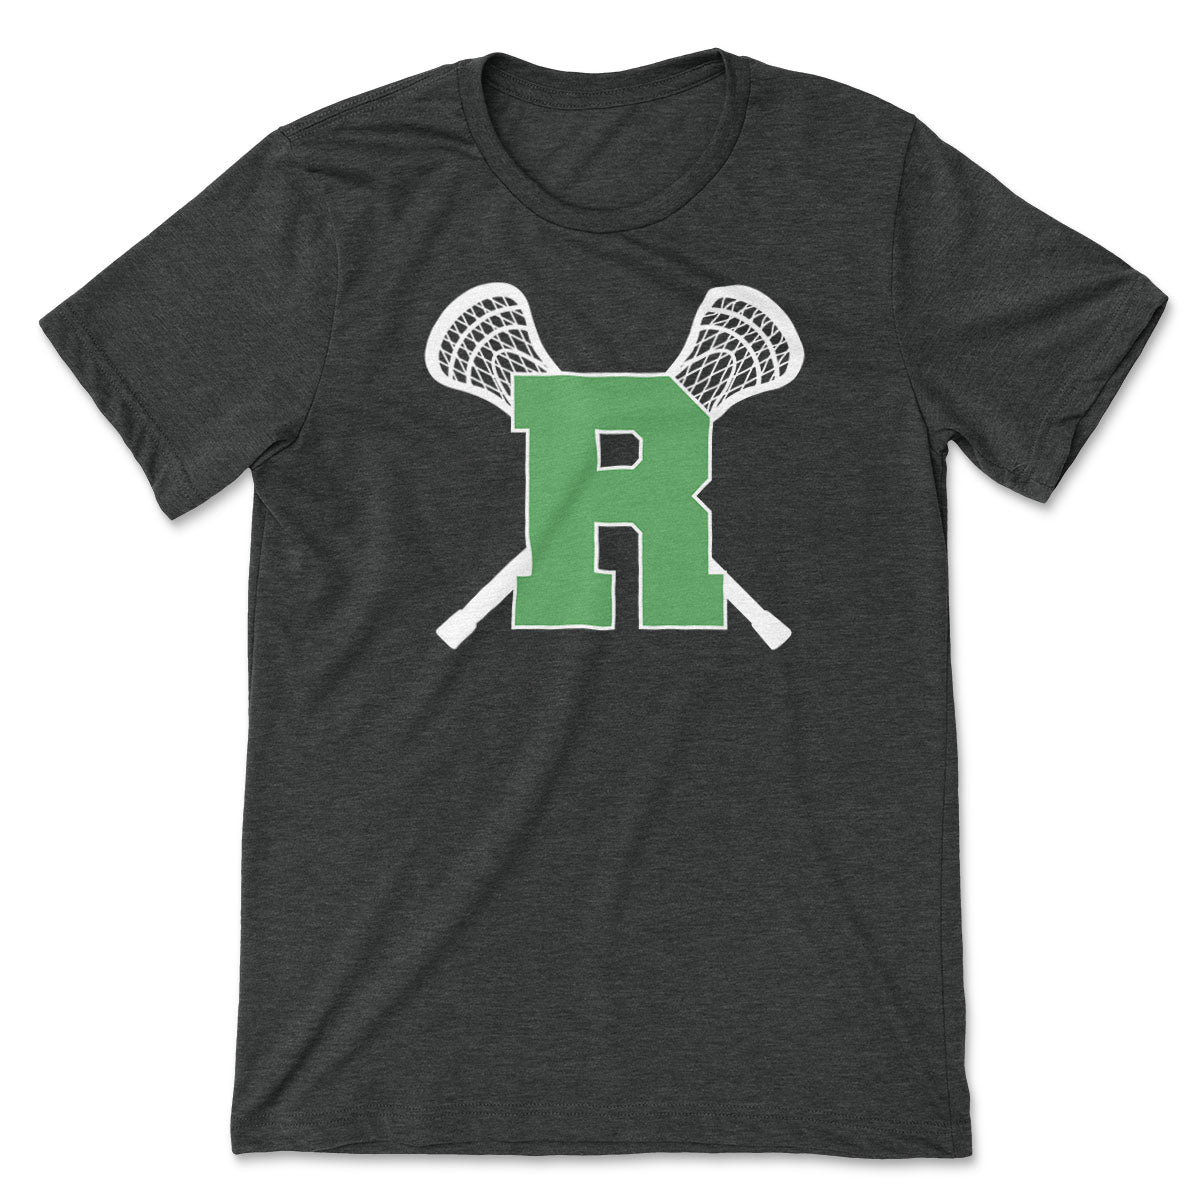 Rochester Lacrosse // Youth Tee